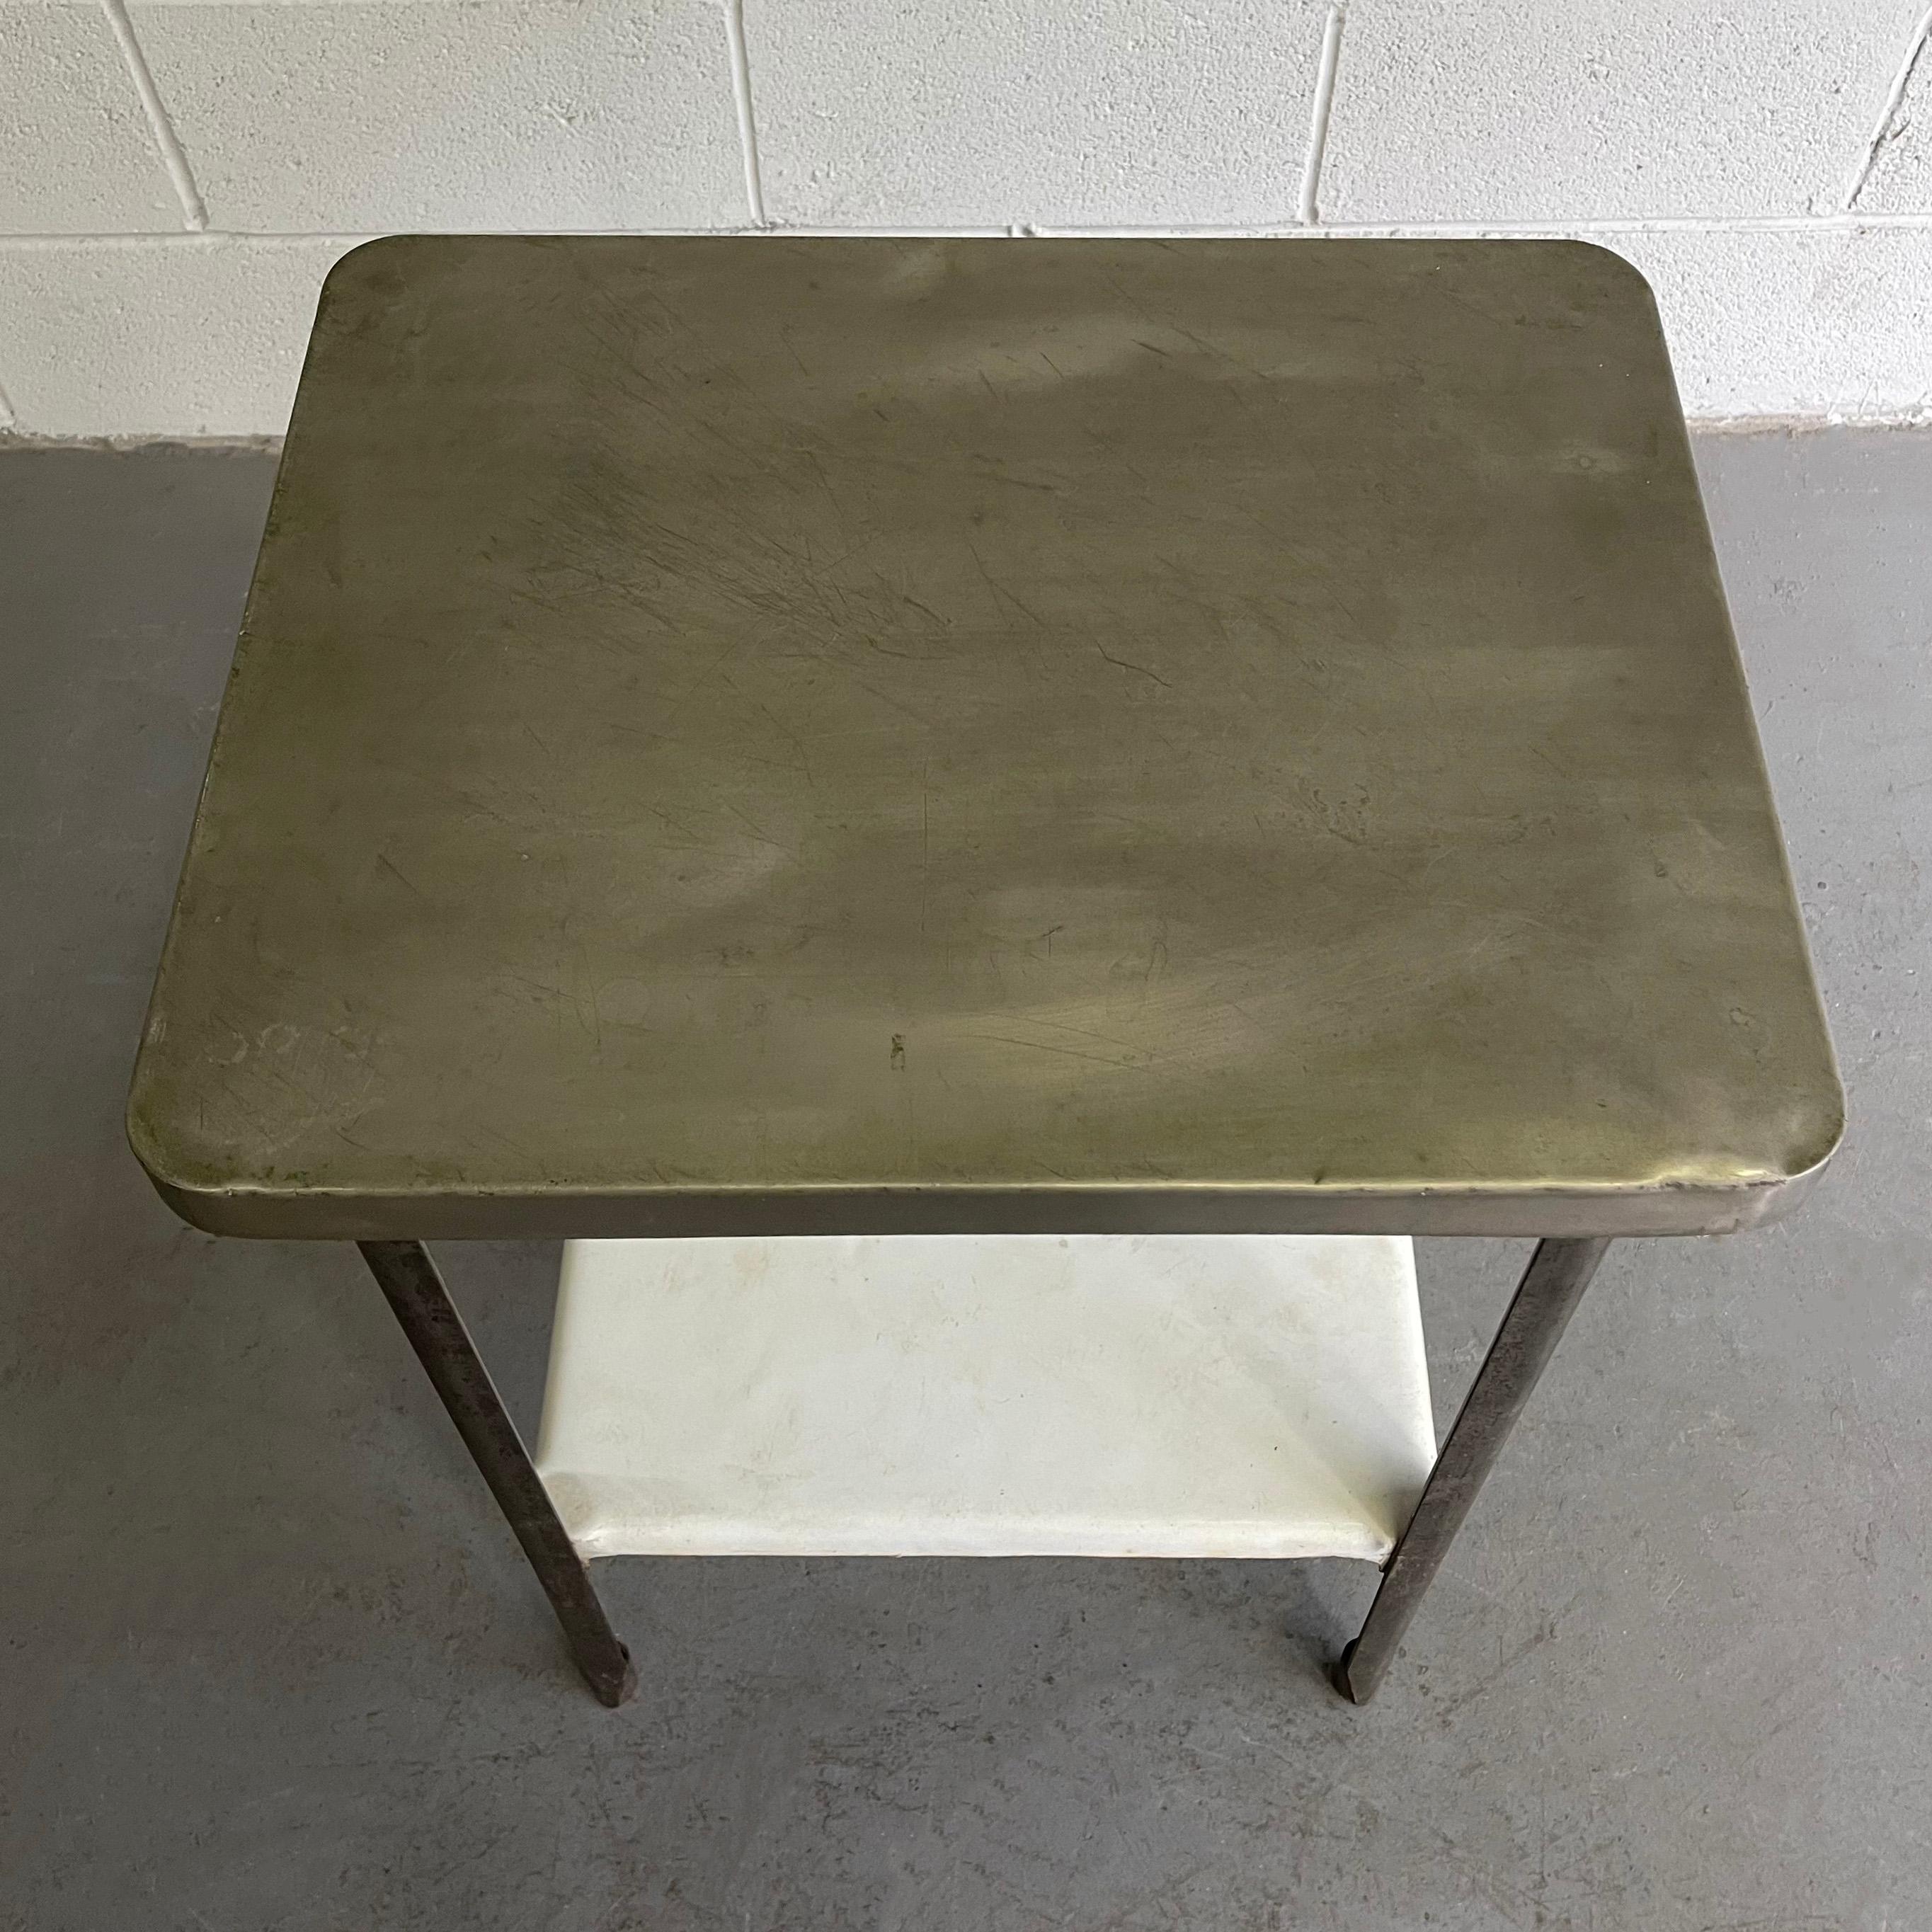 Enamel Antique Industrial Apothecary Prep Table For Sale